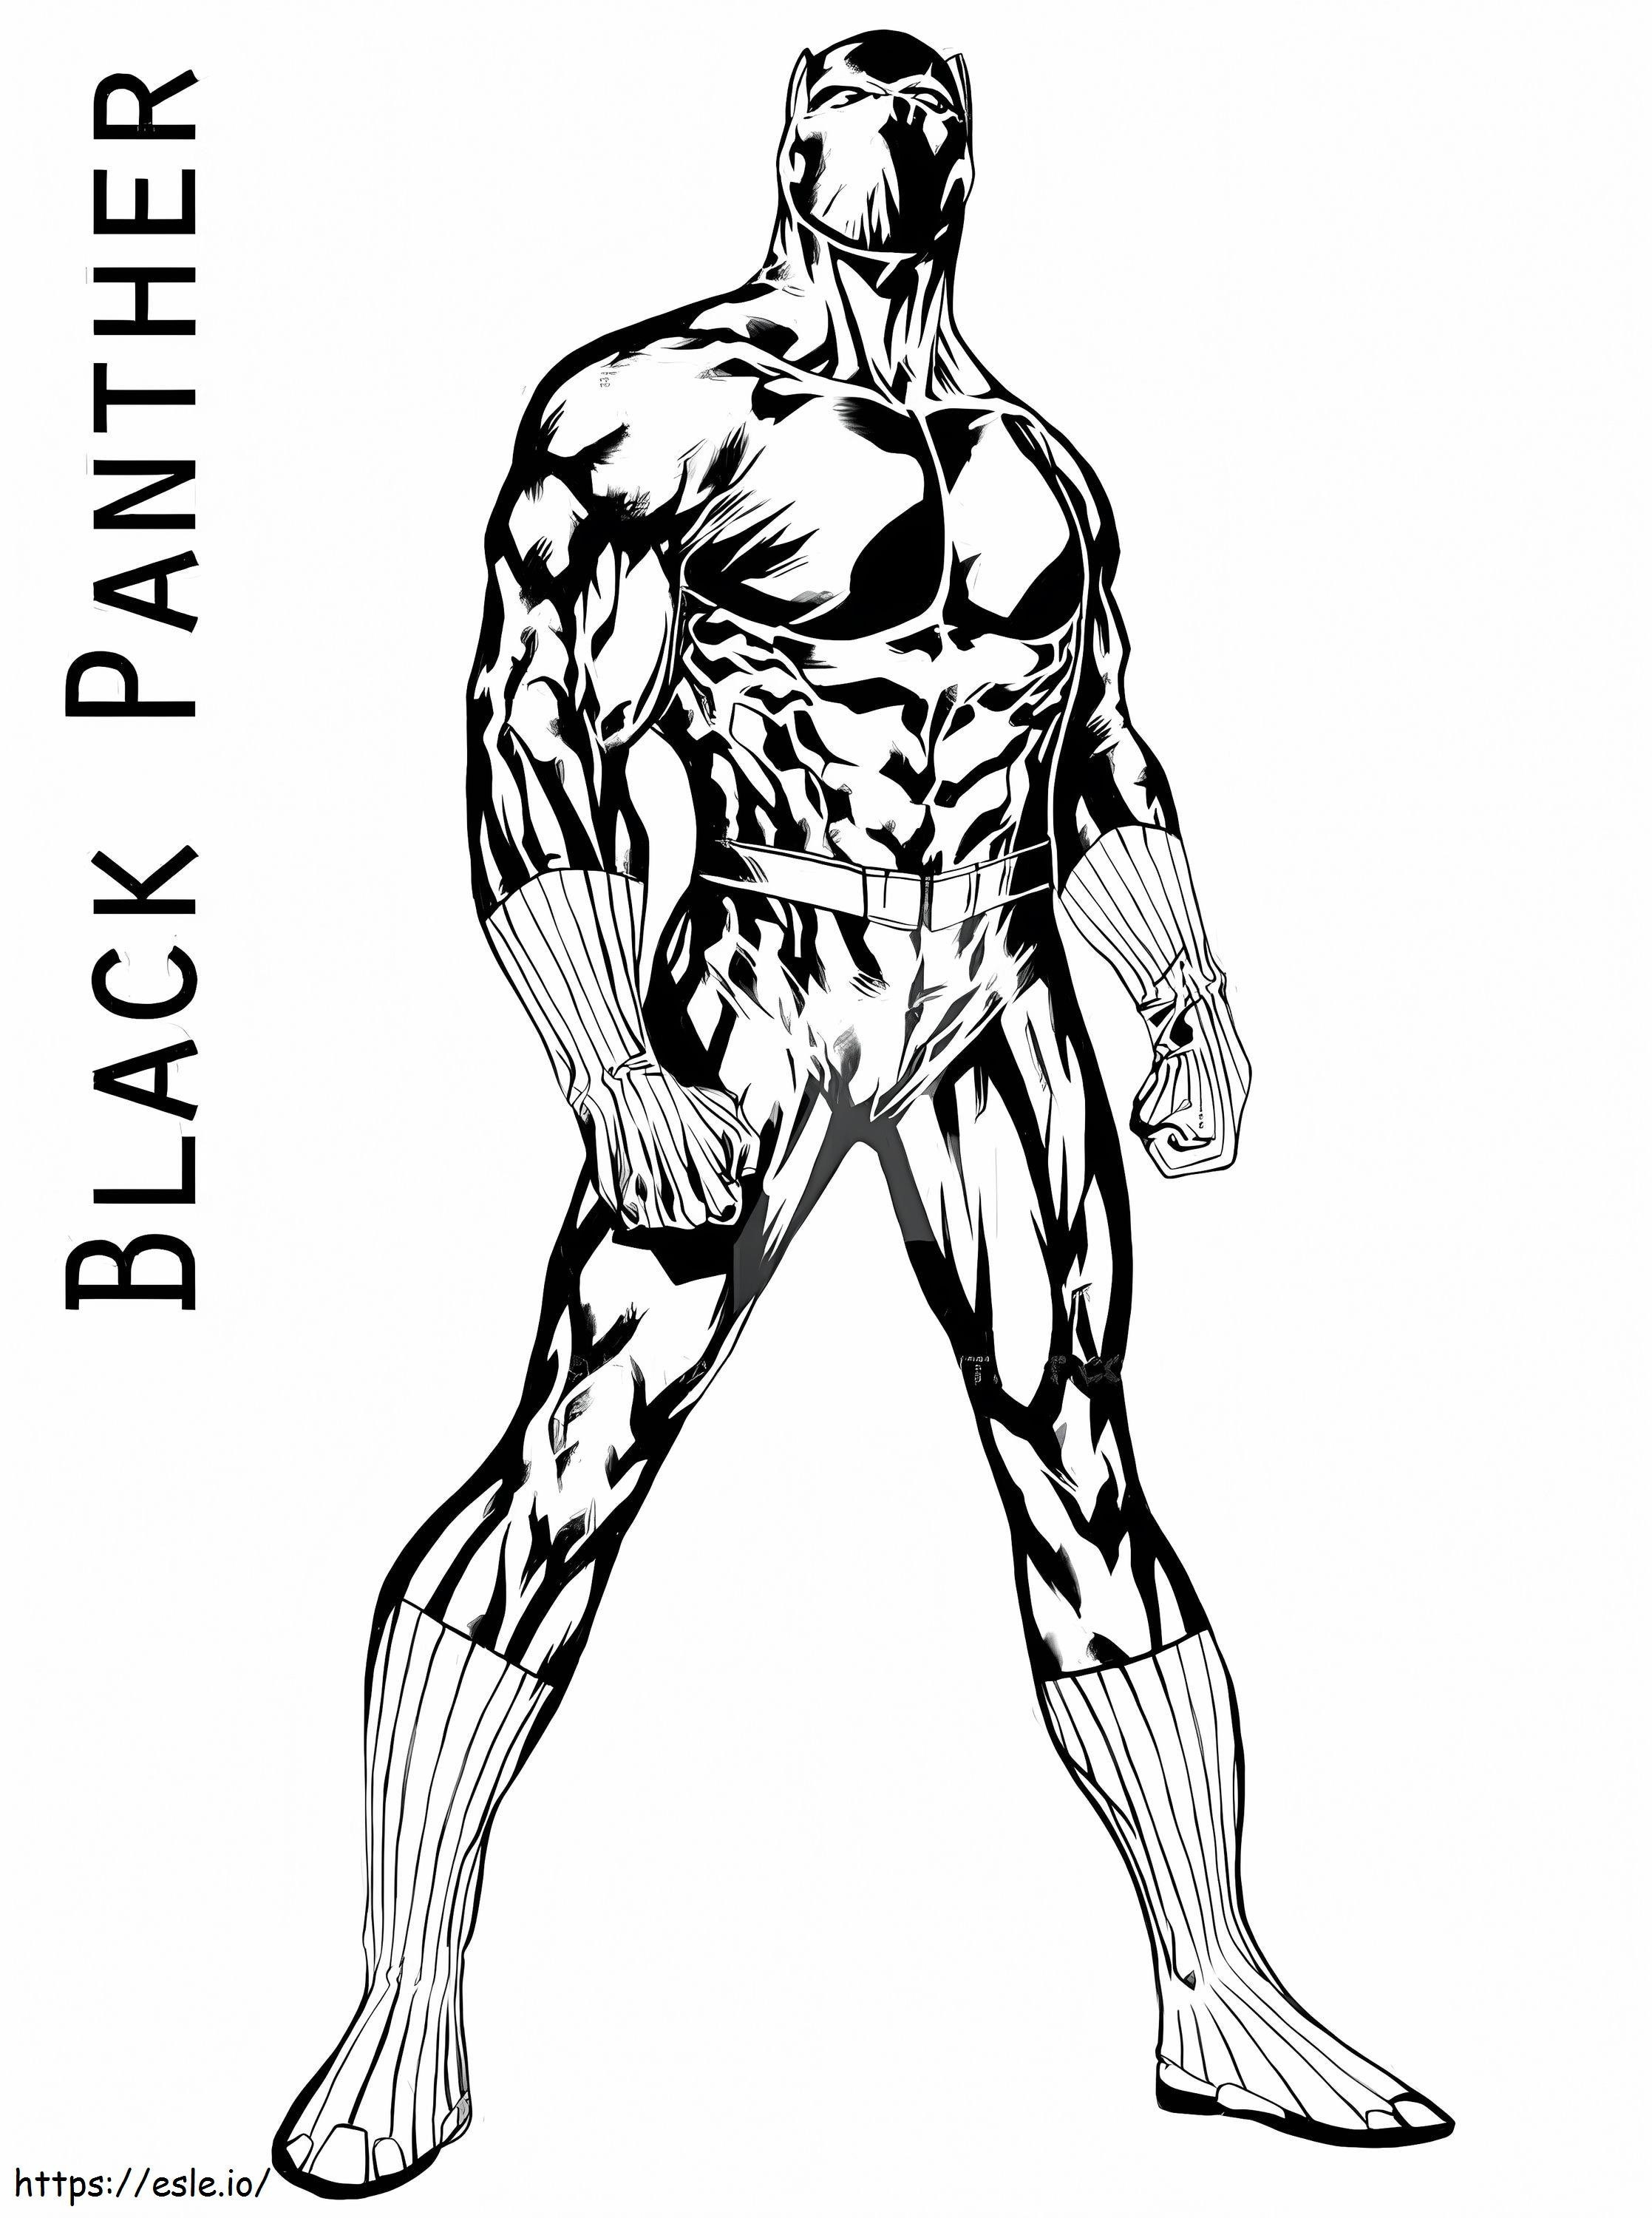 Superbe Black Panther coloring page